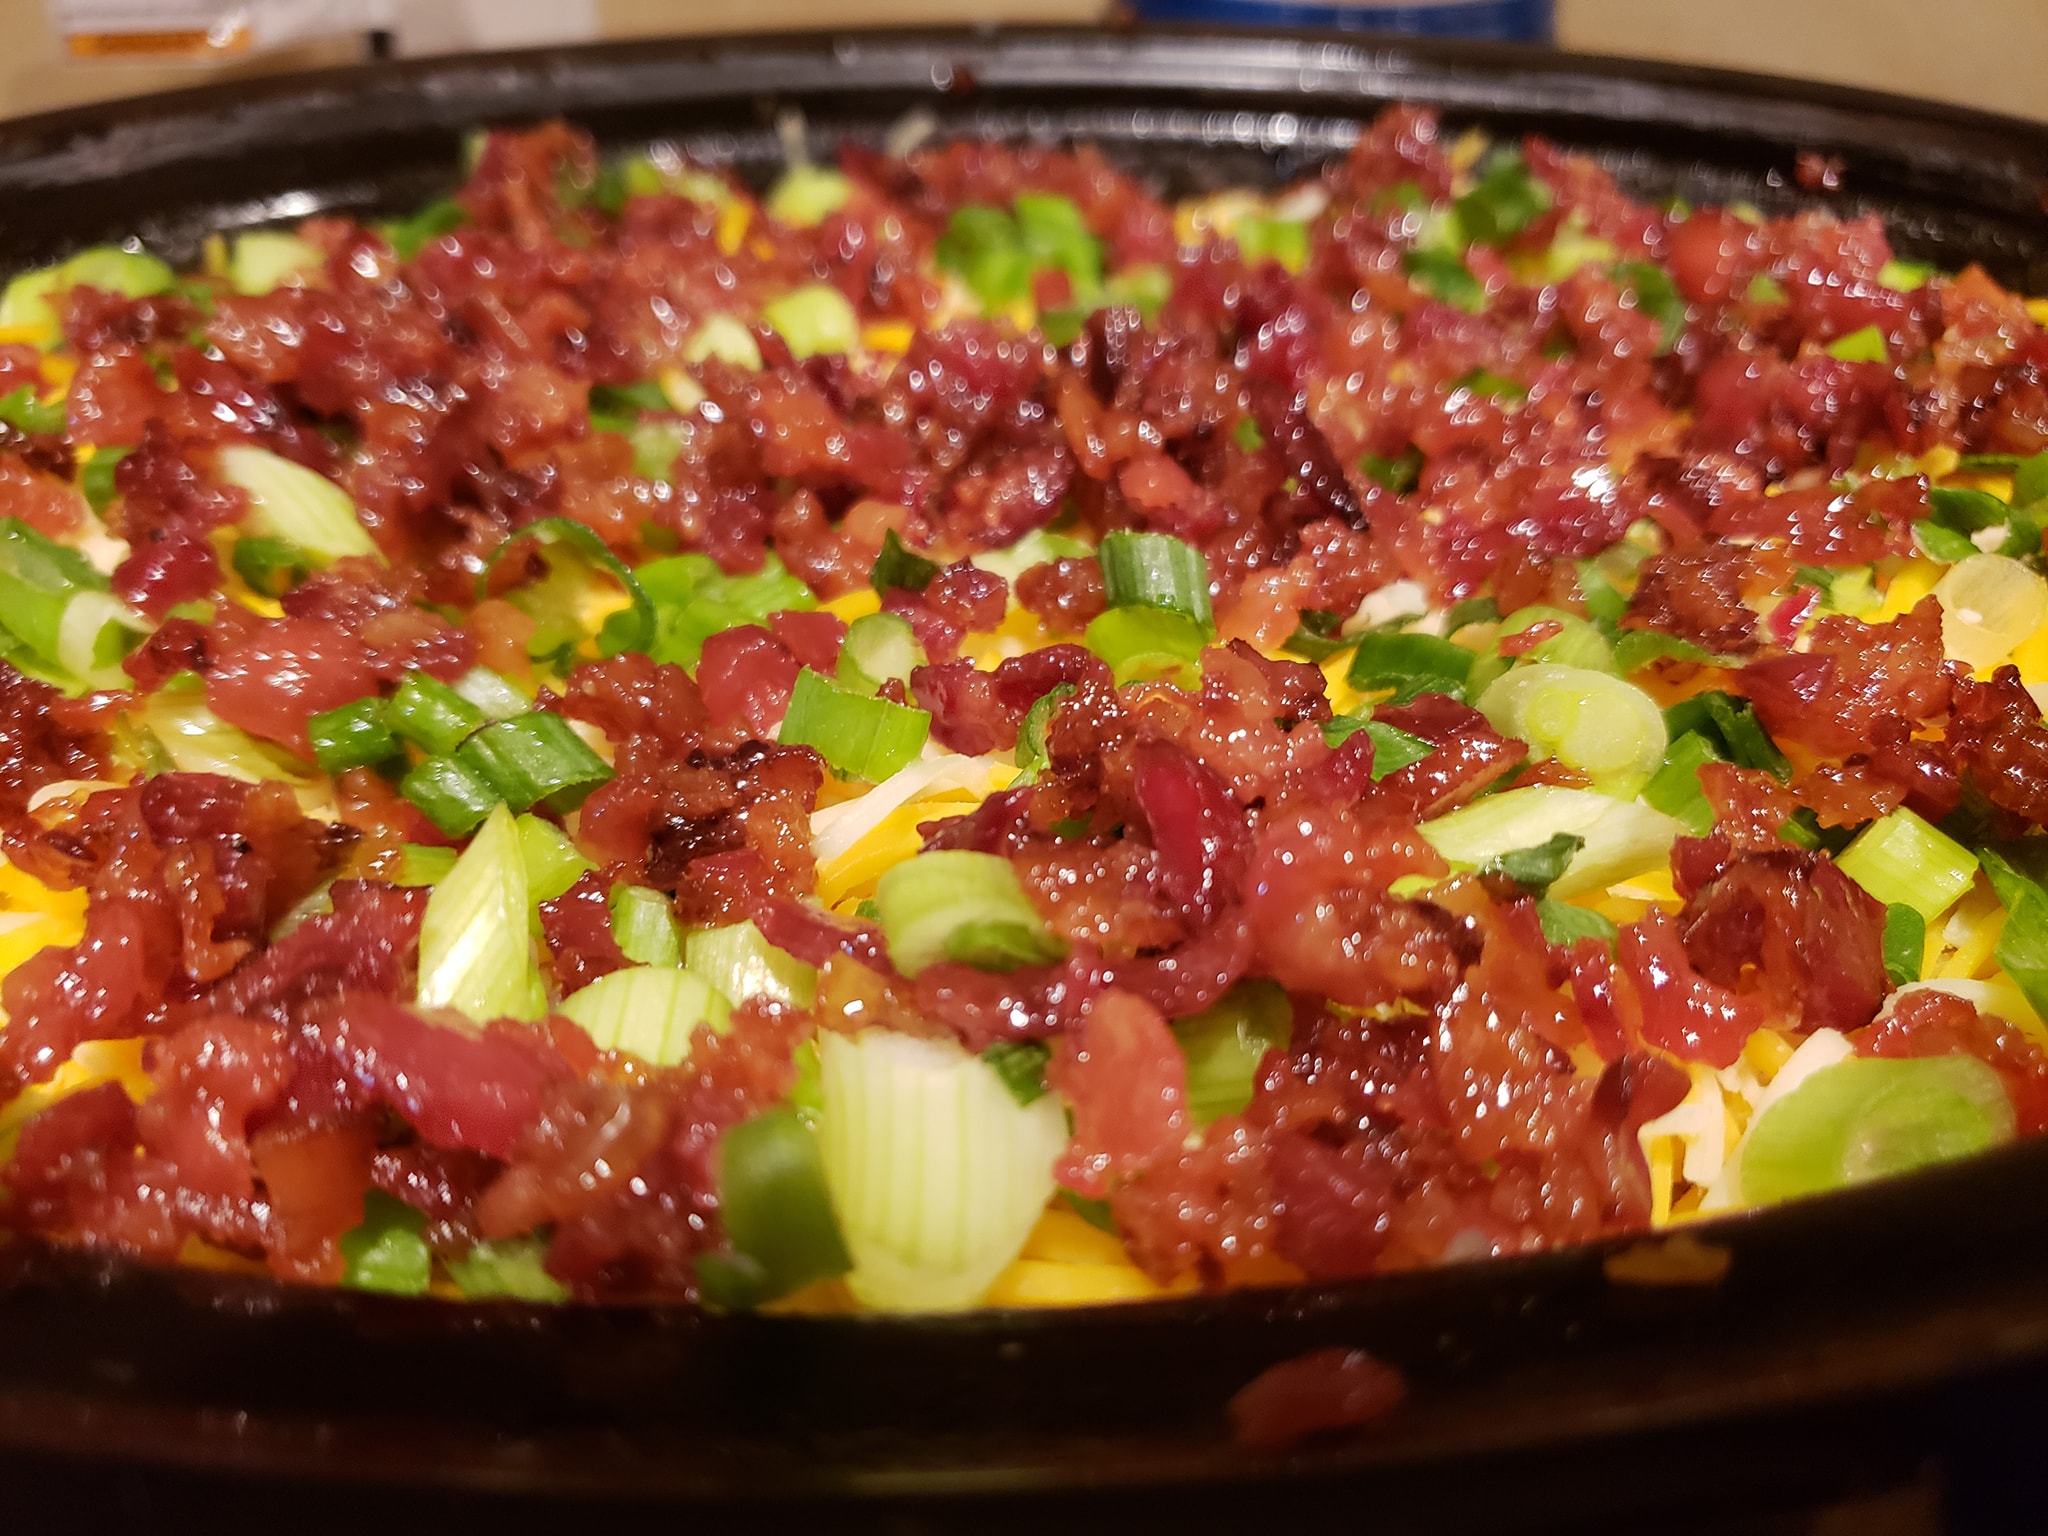 Nicole Thelin's Sweet & Spicy Maple Bacon Chili